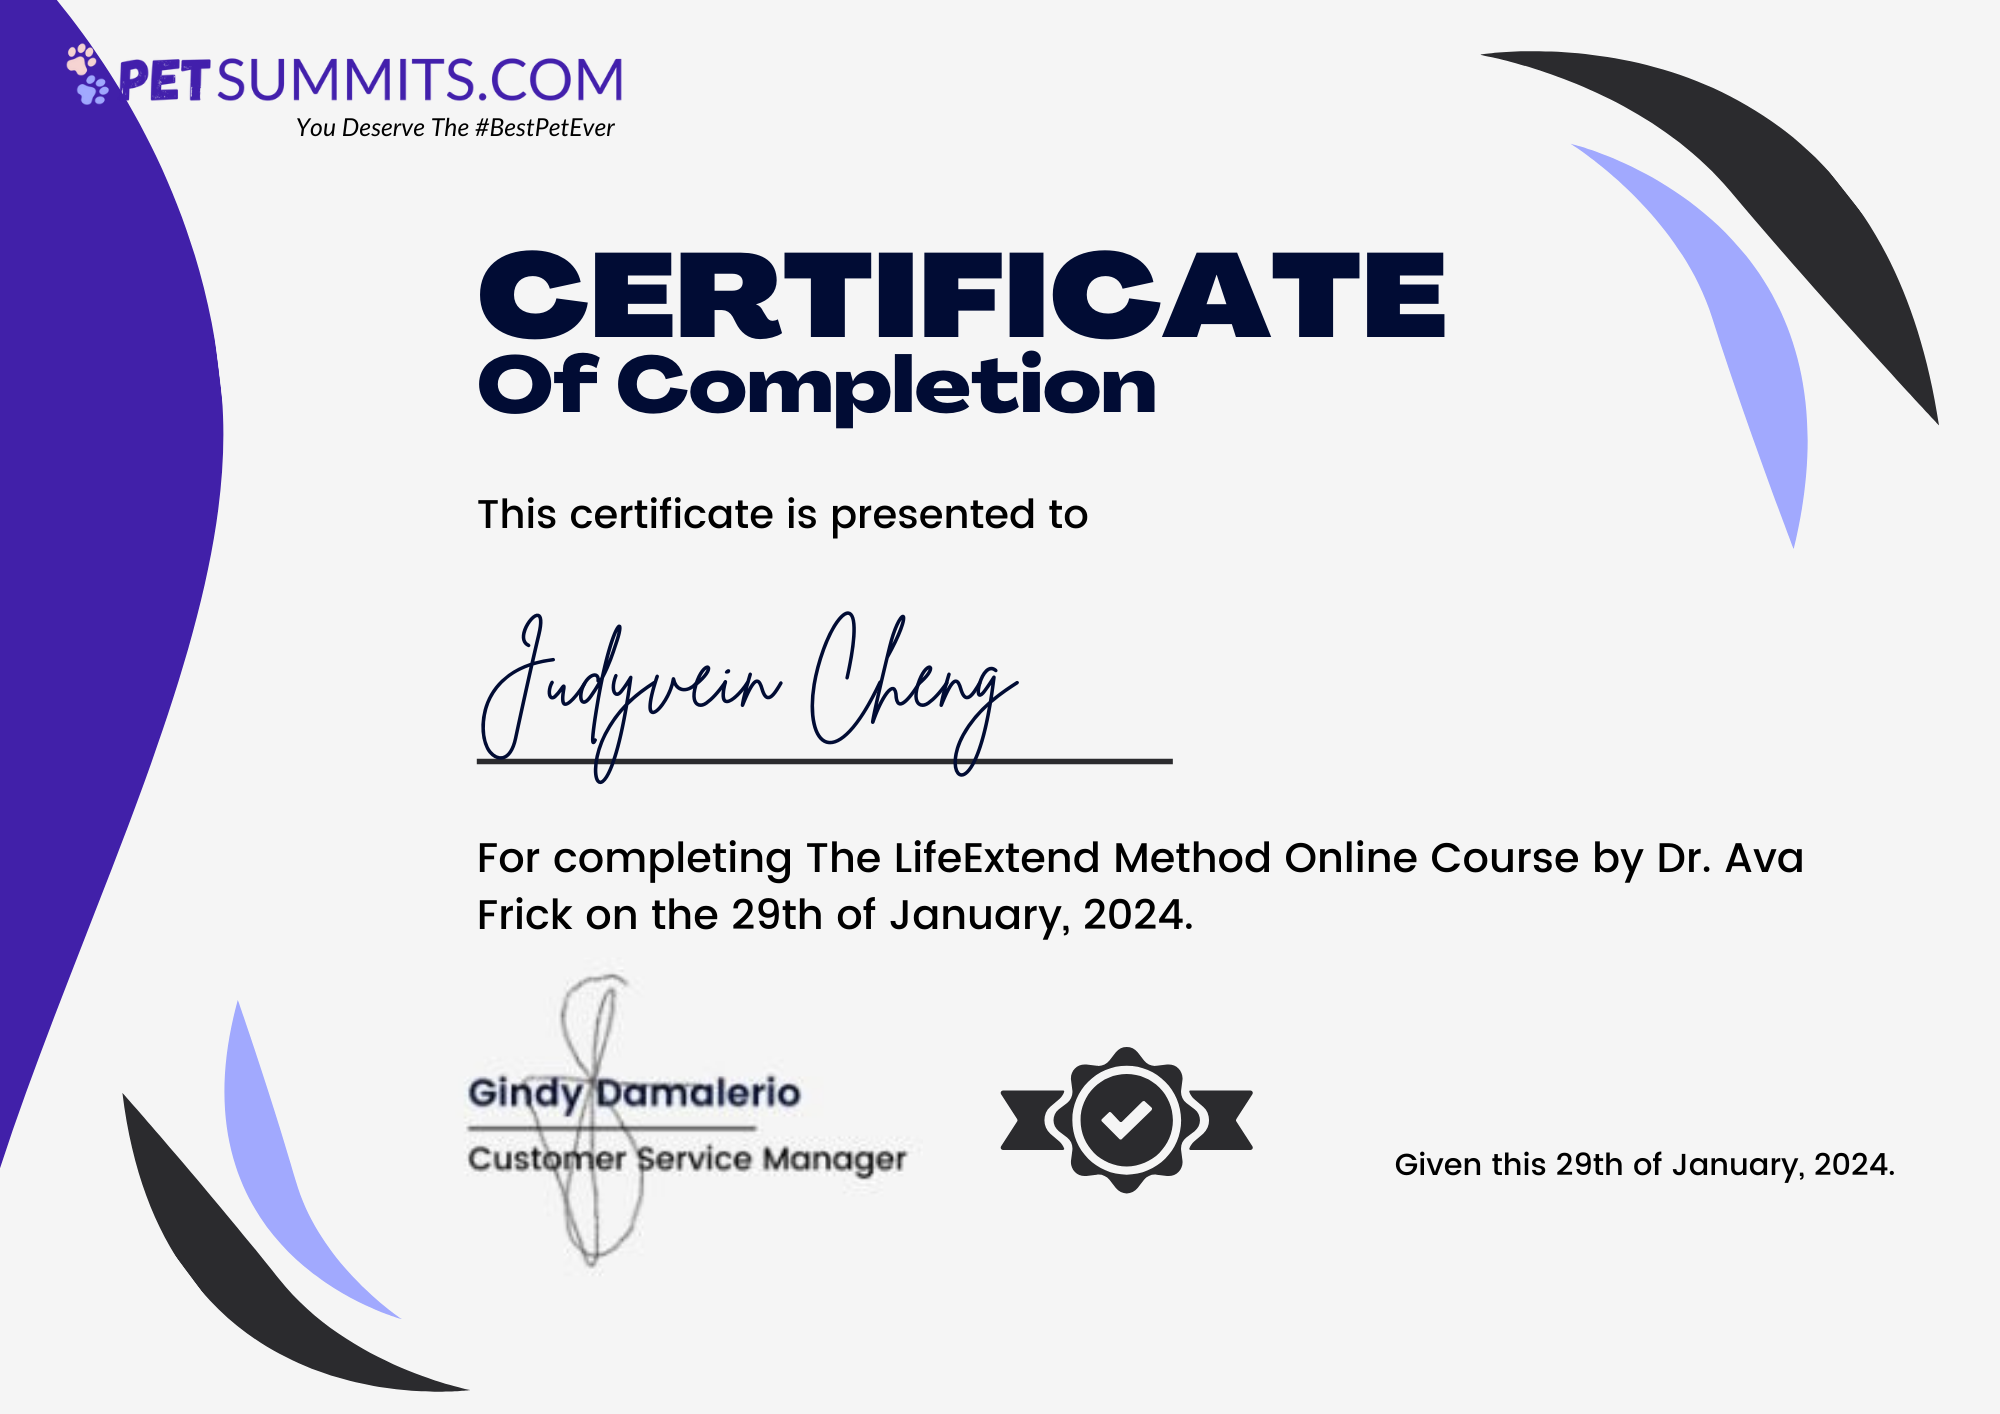 The LifeExtend Method Completion Certificate_Judyvein Cheng